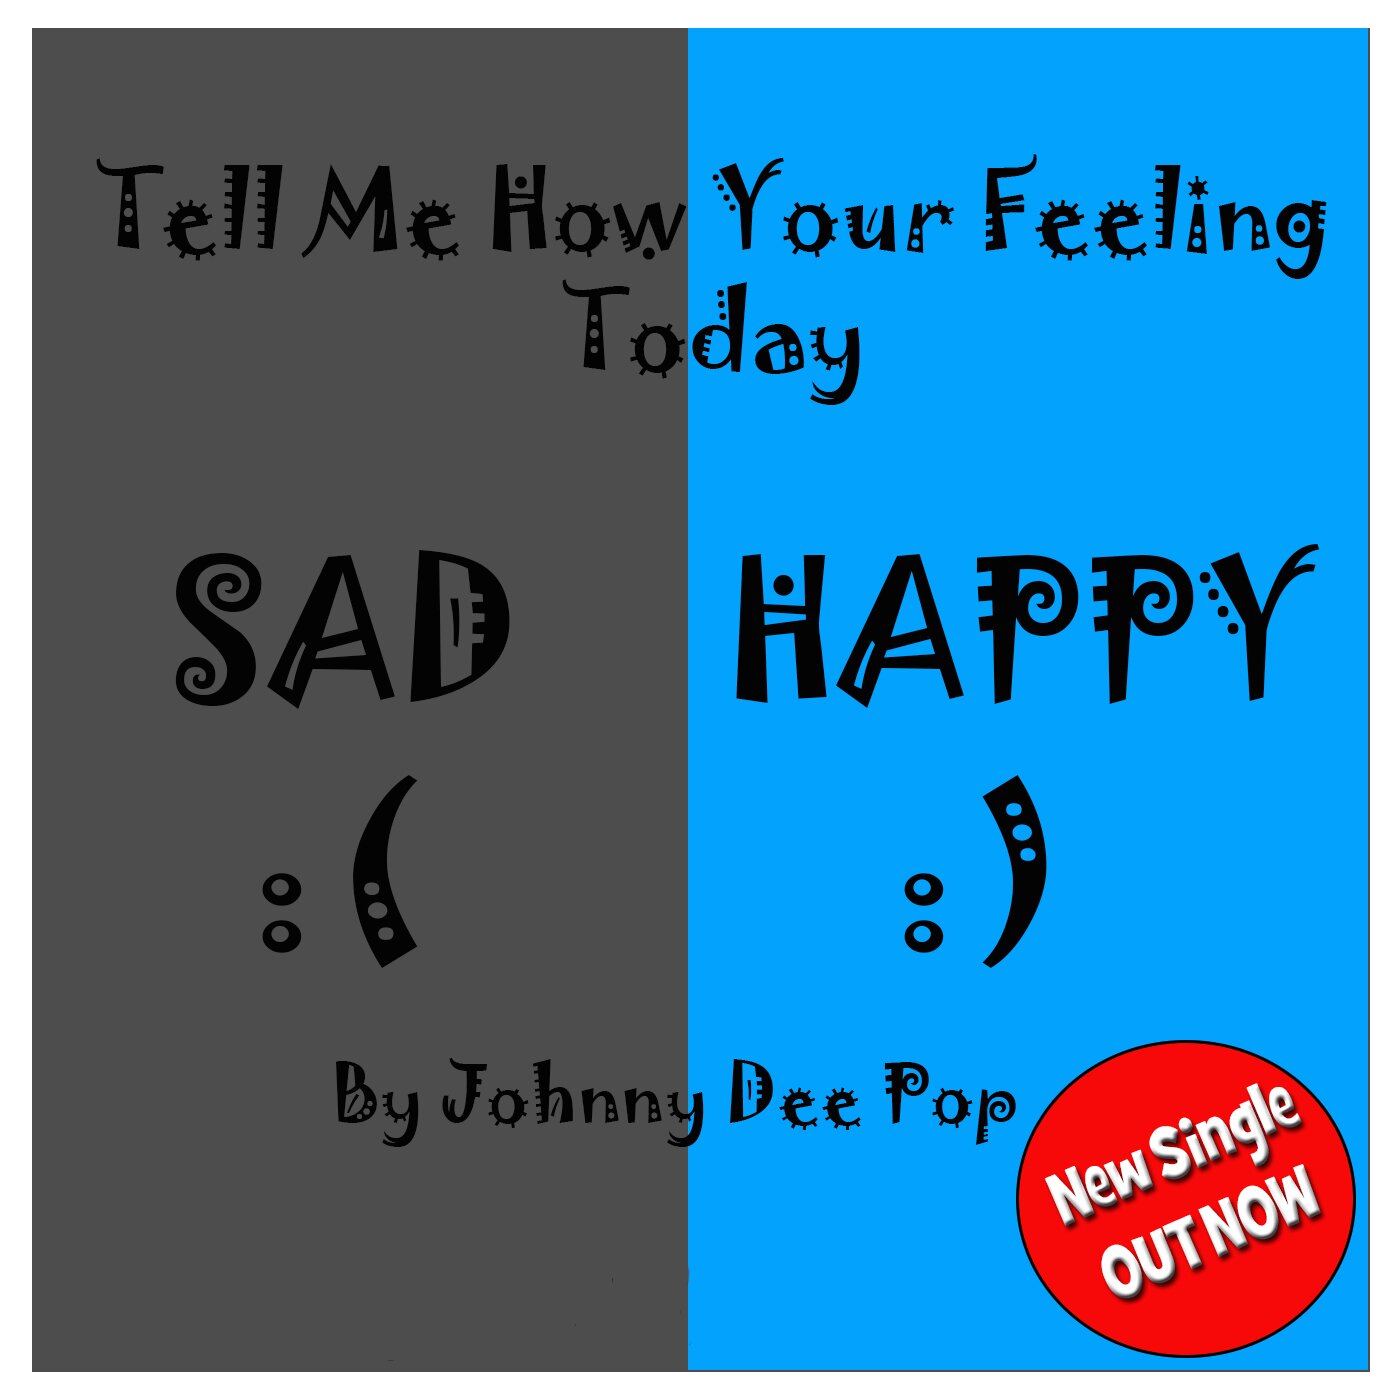 The debut Single of Johnny Dee Pop. Releasing his 1st song titled Tell Me How Your Feeling Today. Raising money and awareness for Mental Health Charities.